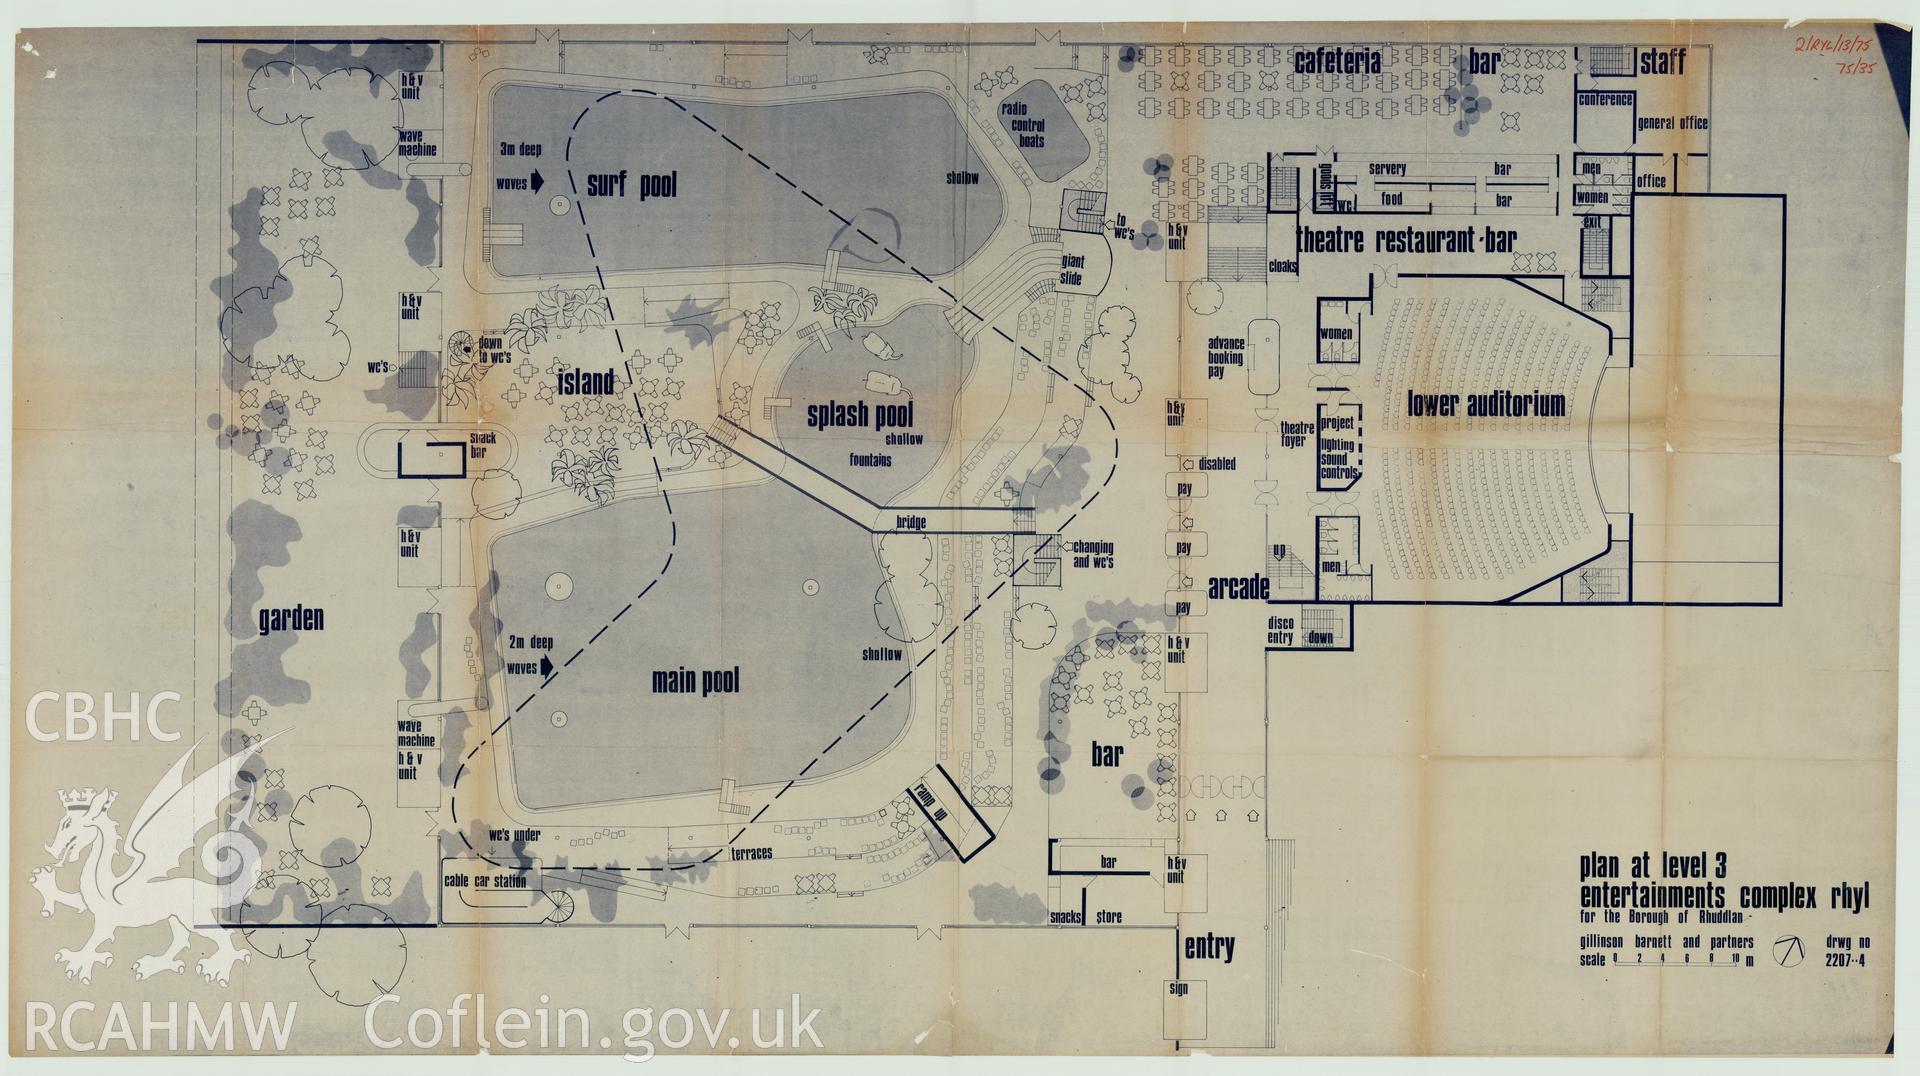 Digital copy of a measured drawing showing plans at level 3 of the Sun Centre, Rhyl, produced by Gillinson Barnett and Partners, 1975. Loaned for copying by Denbighshire County Council.